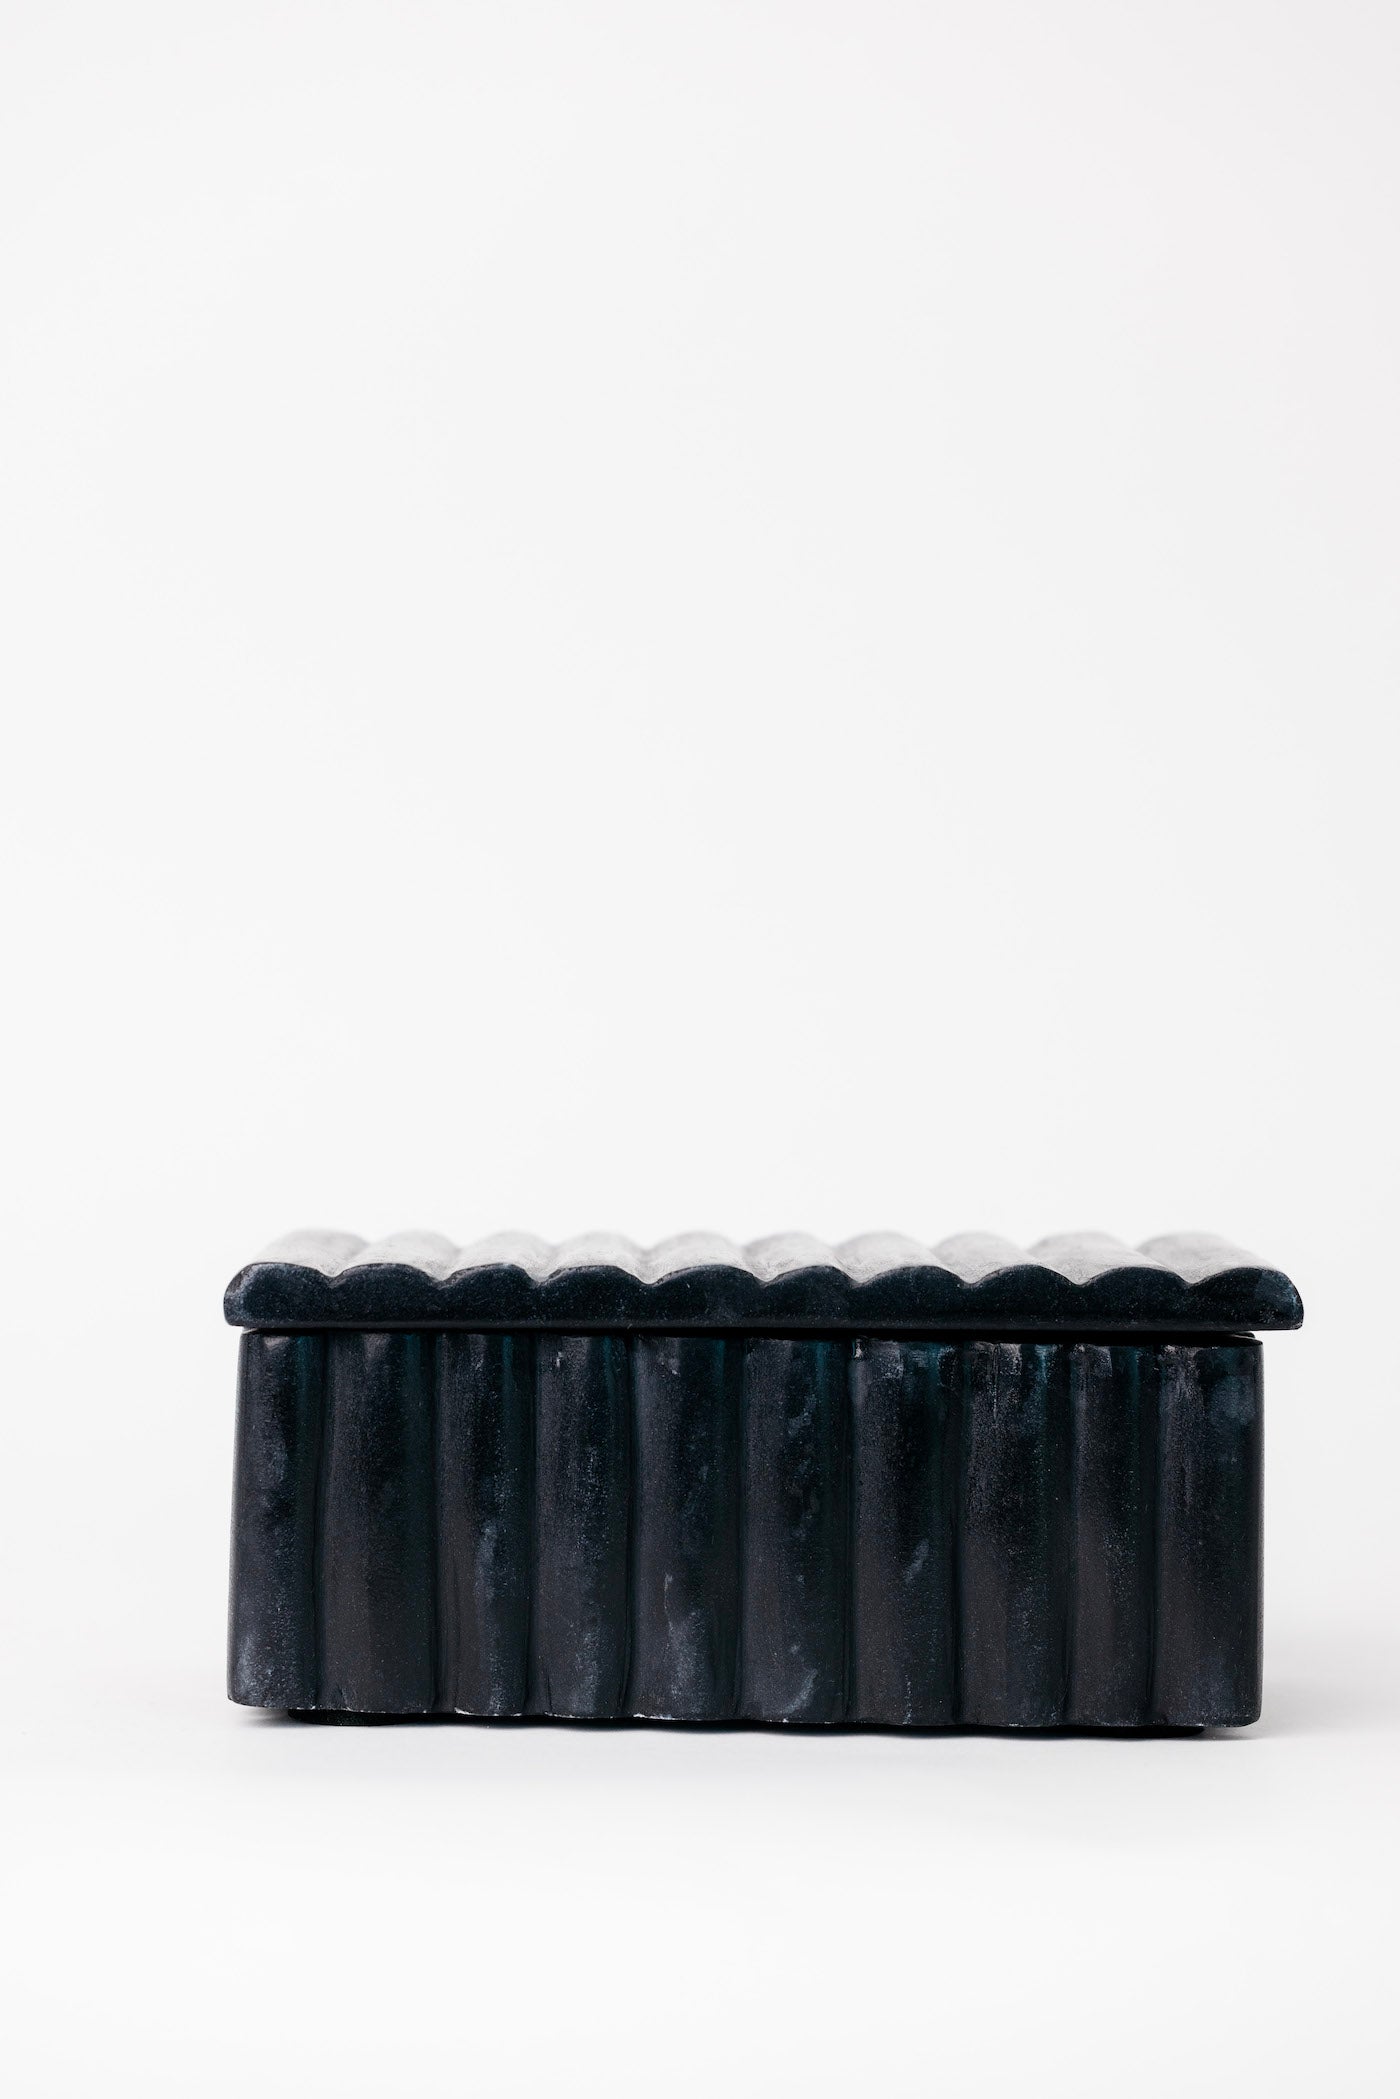 Rochelle Ribbed Marble Box - Black